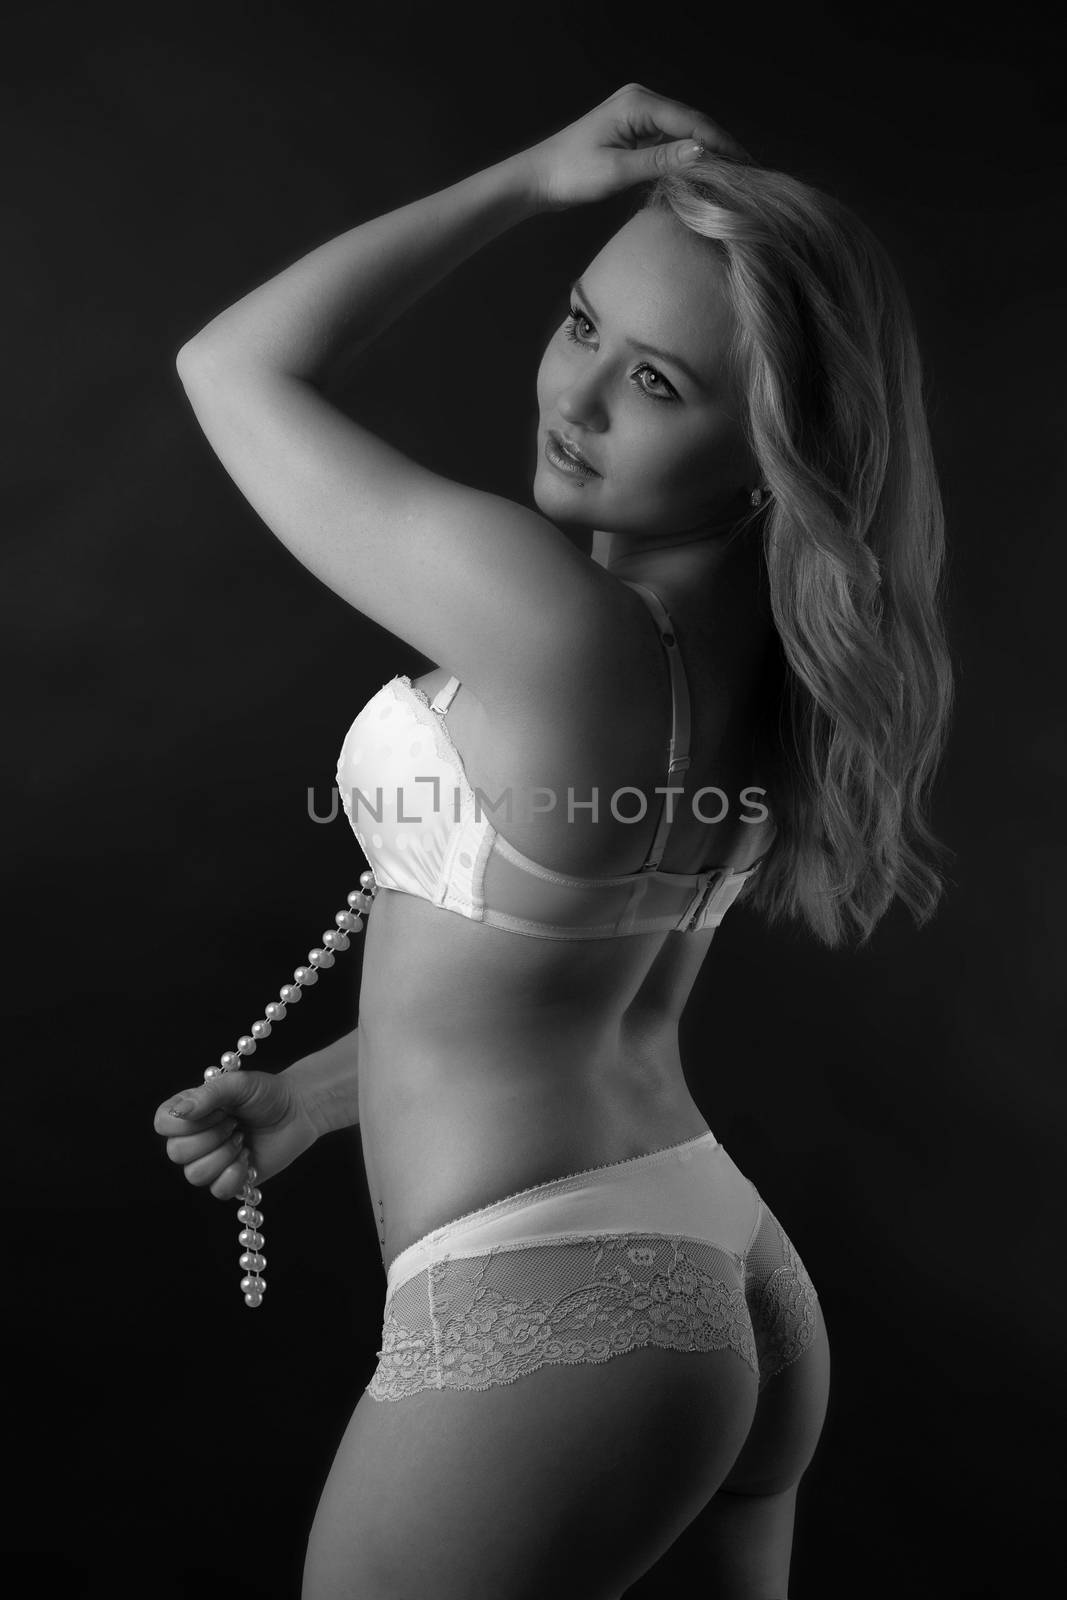 Young woman in white lingerie by 25ehaag6